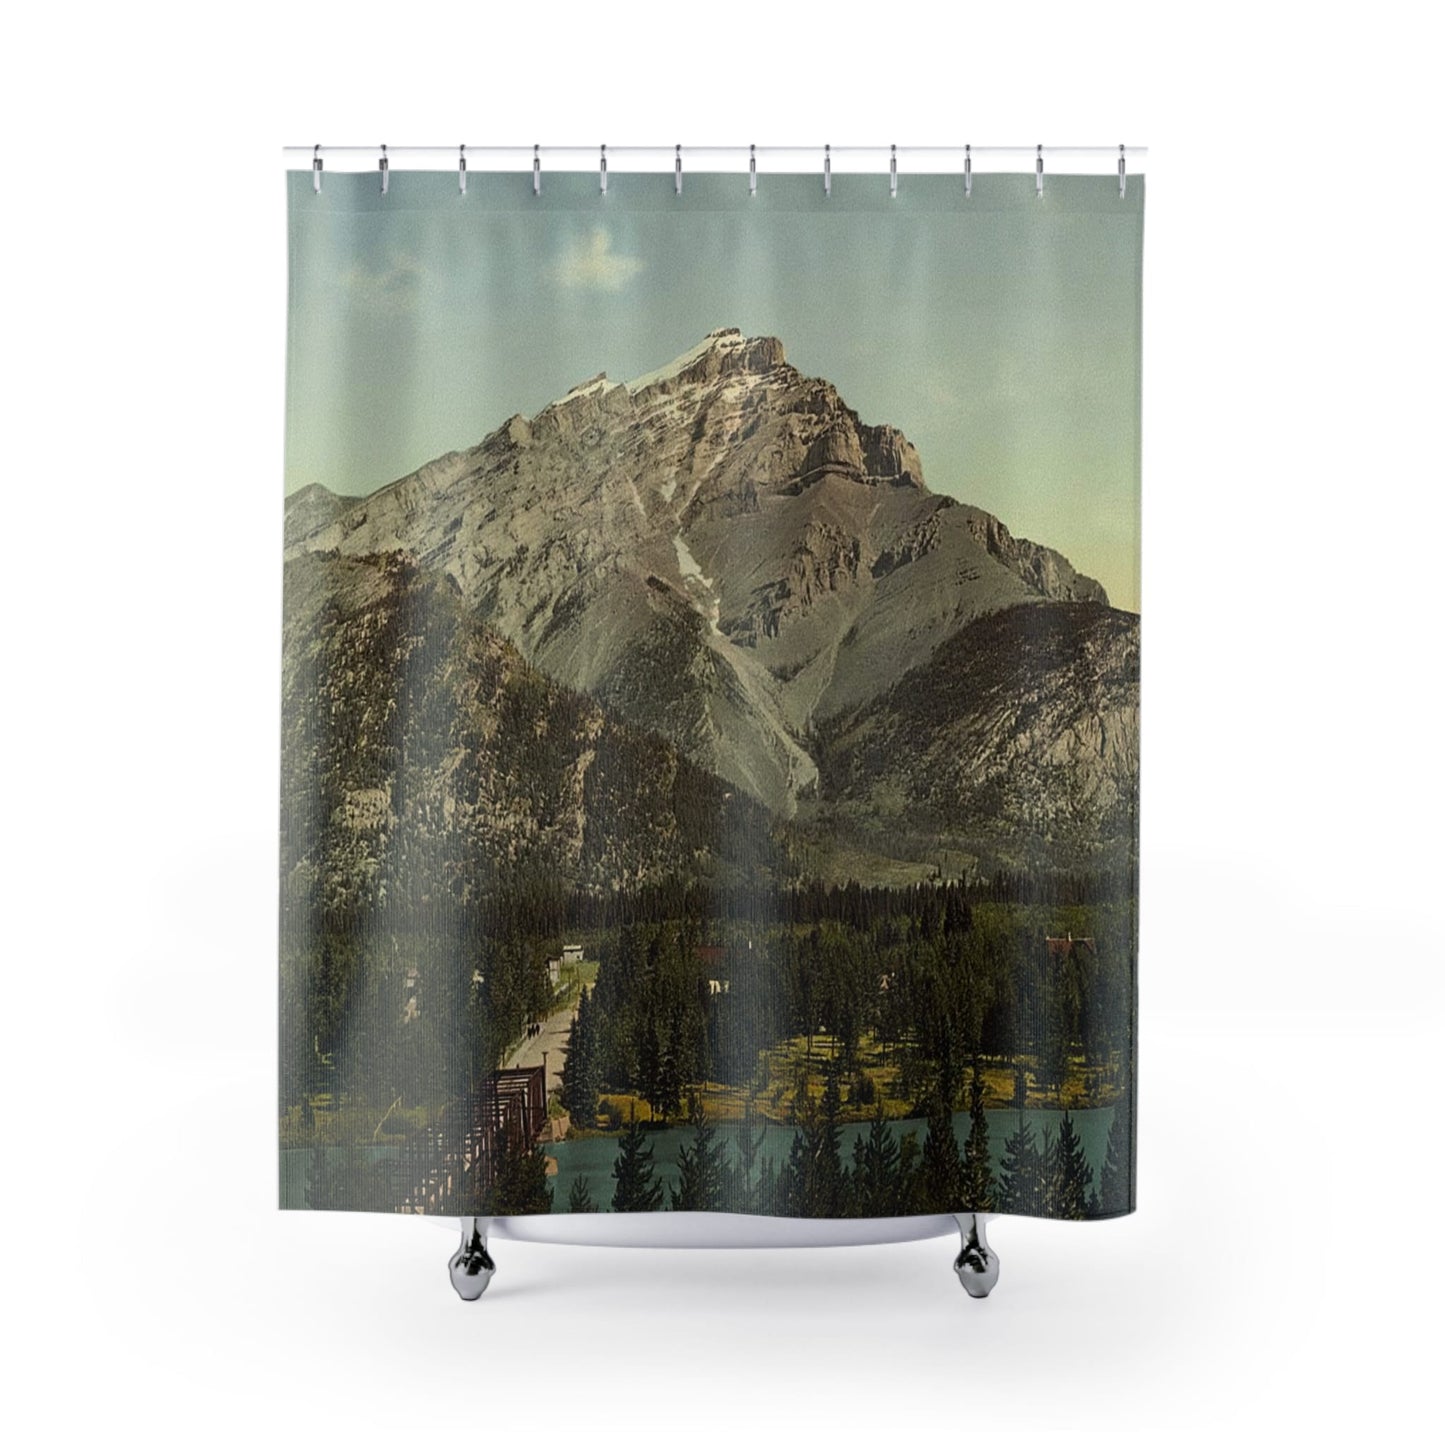 Emerald Green Landscape Shower Curtain with mountains design, nature-inspired bathroom decor featuring vibrant mountain scenes.